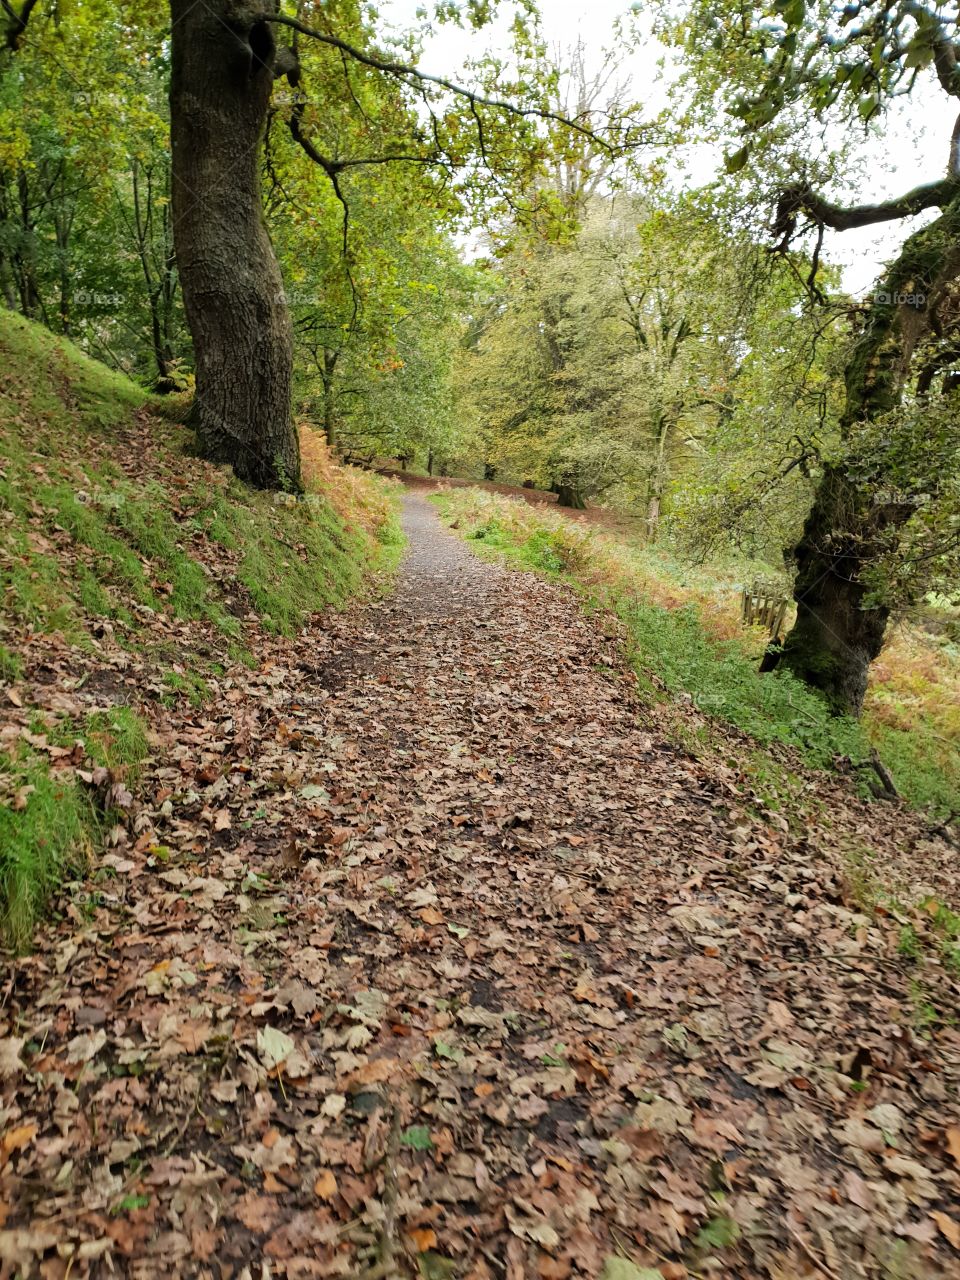 "Life is a short enough walk, try not ruffle to many leaves" - Welsh Weather